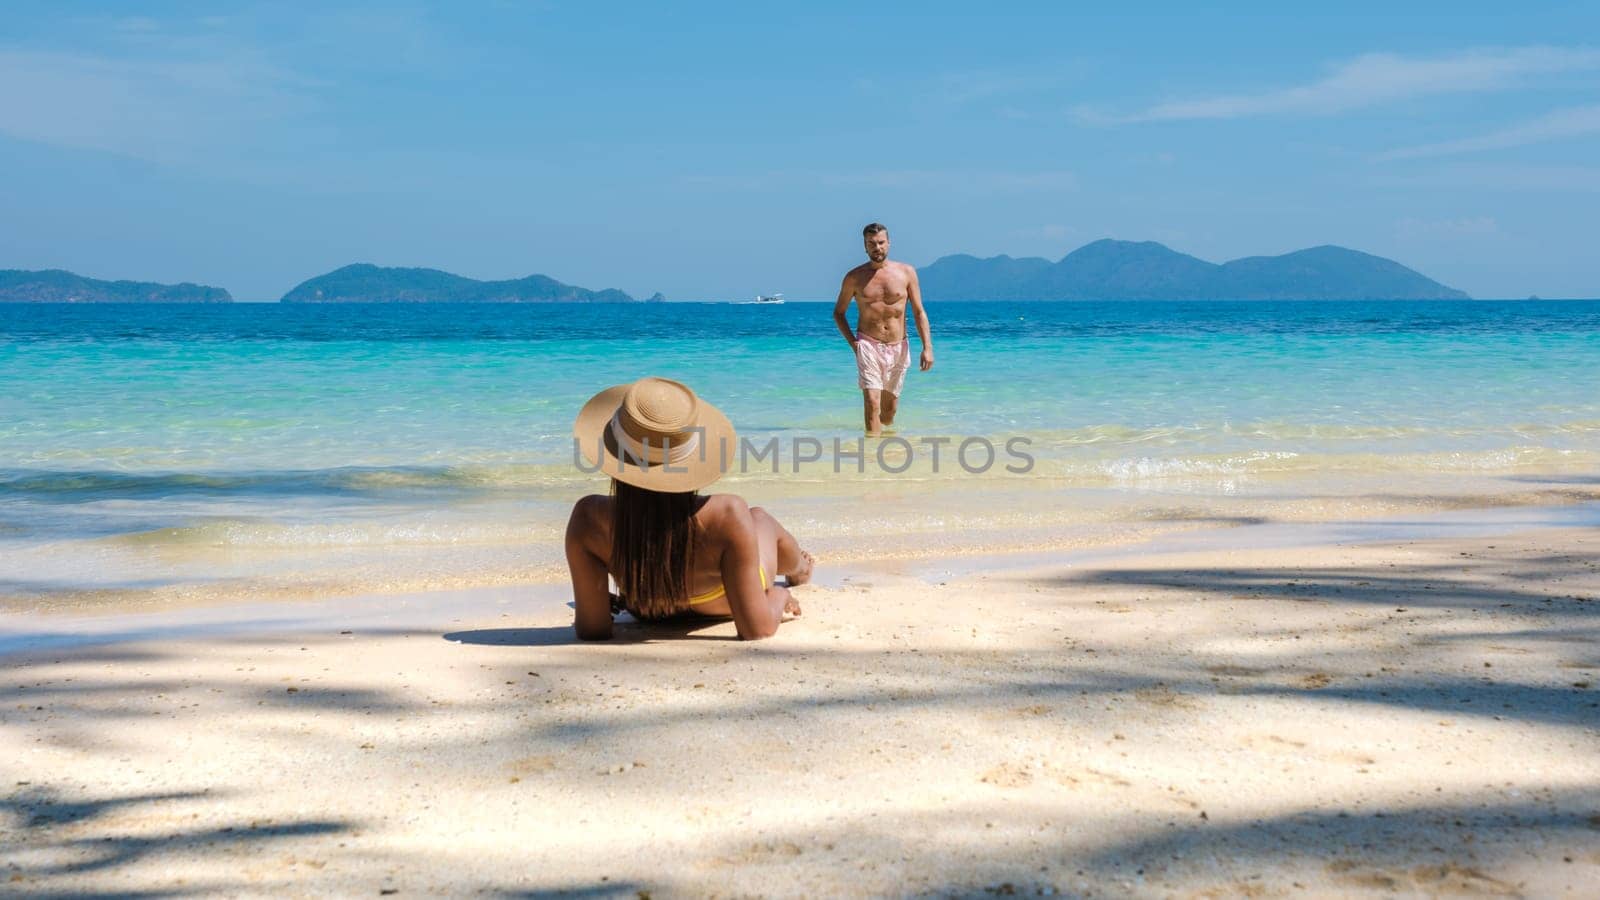 Koh Wai Island Trat Thailand is a tinny tropical Island near Koh Chang. a young couple of men and women on a tropical beach during a luxury vacation in Thailand